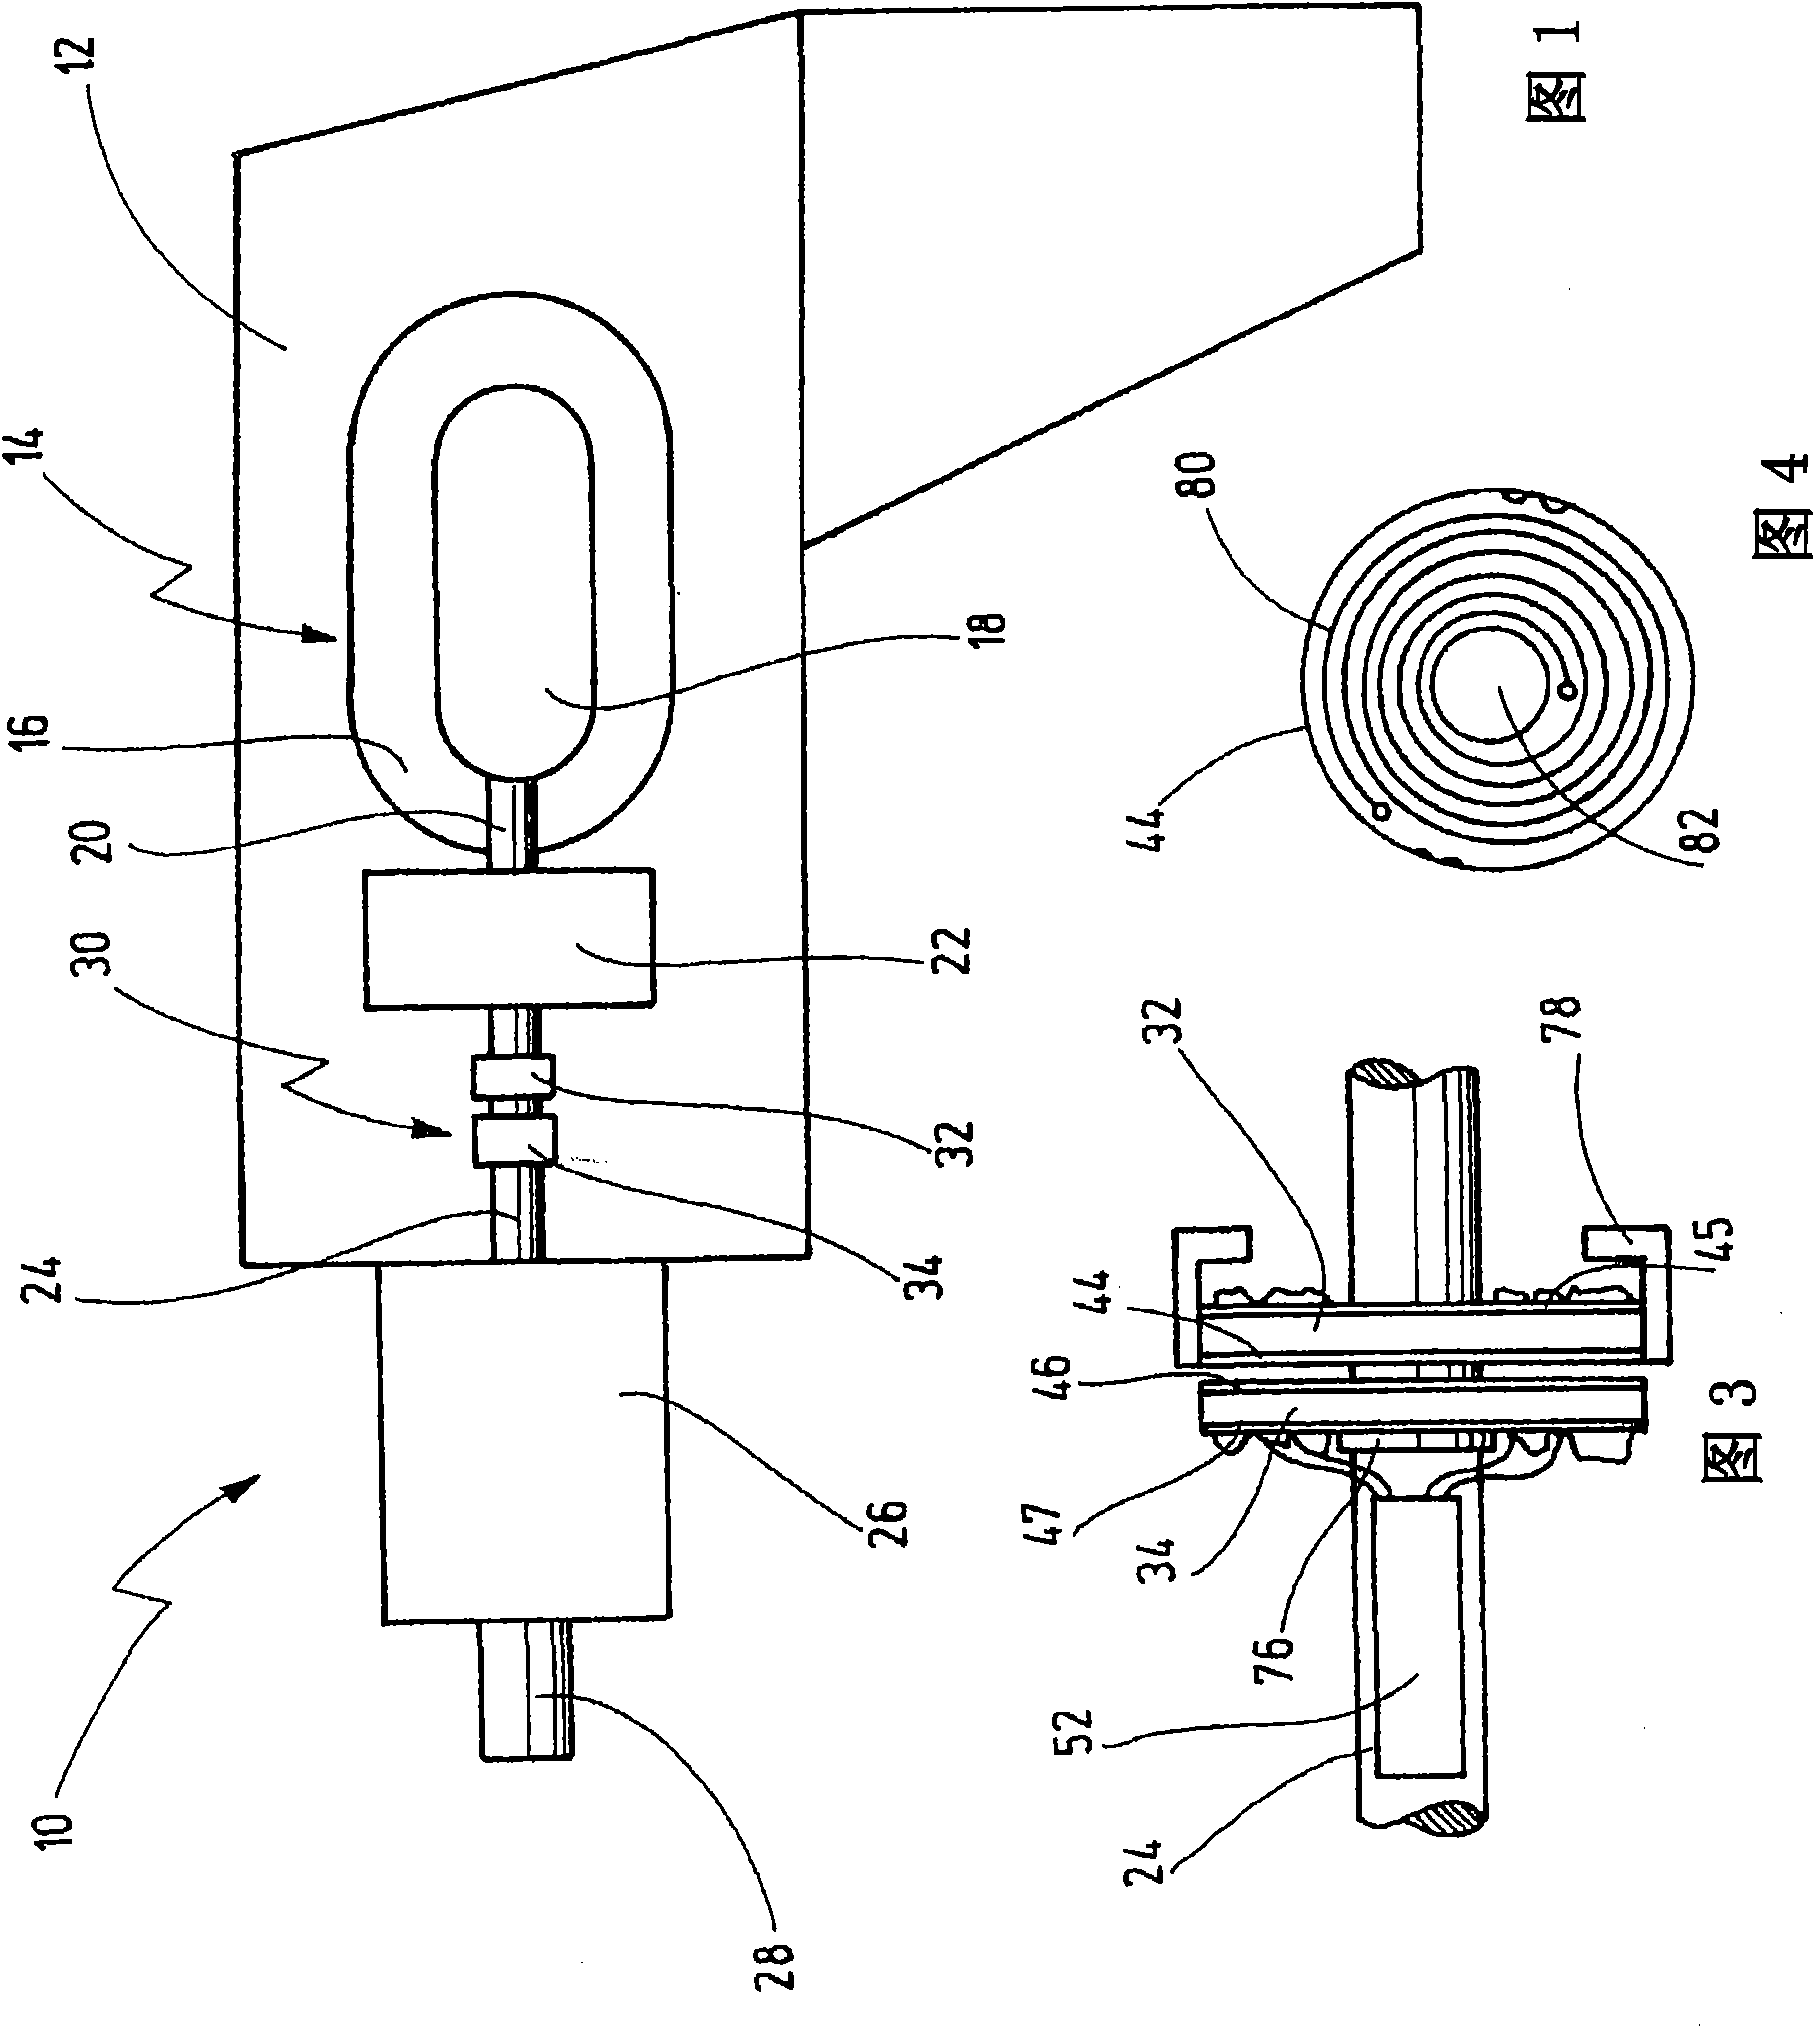 Electric tool with a contactless torque measurement device and method for measuring the torque of an electric tool